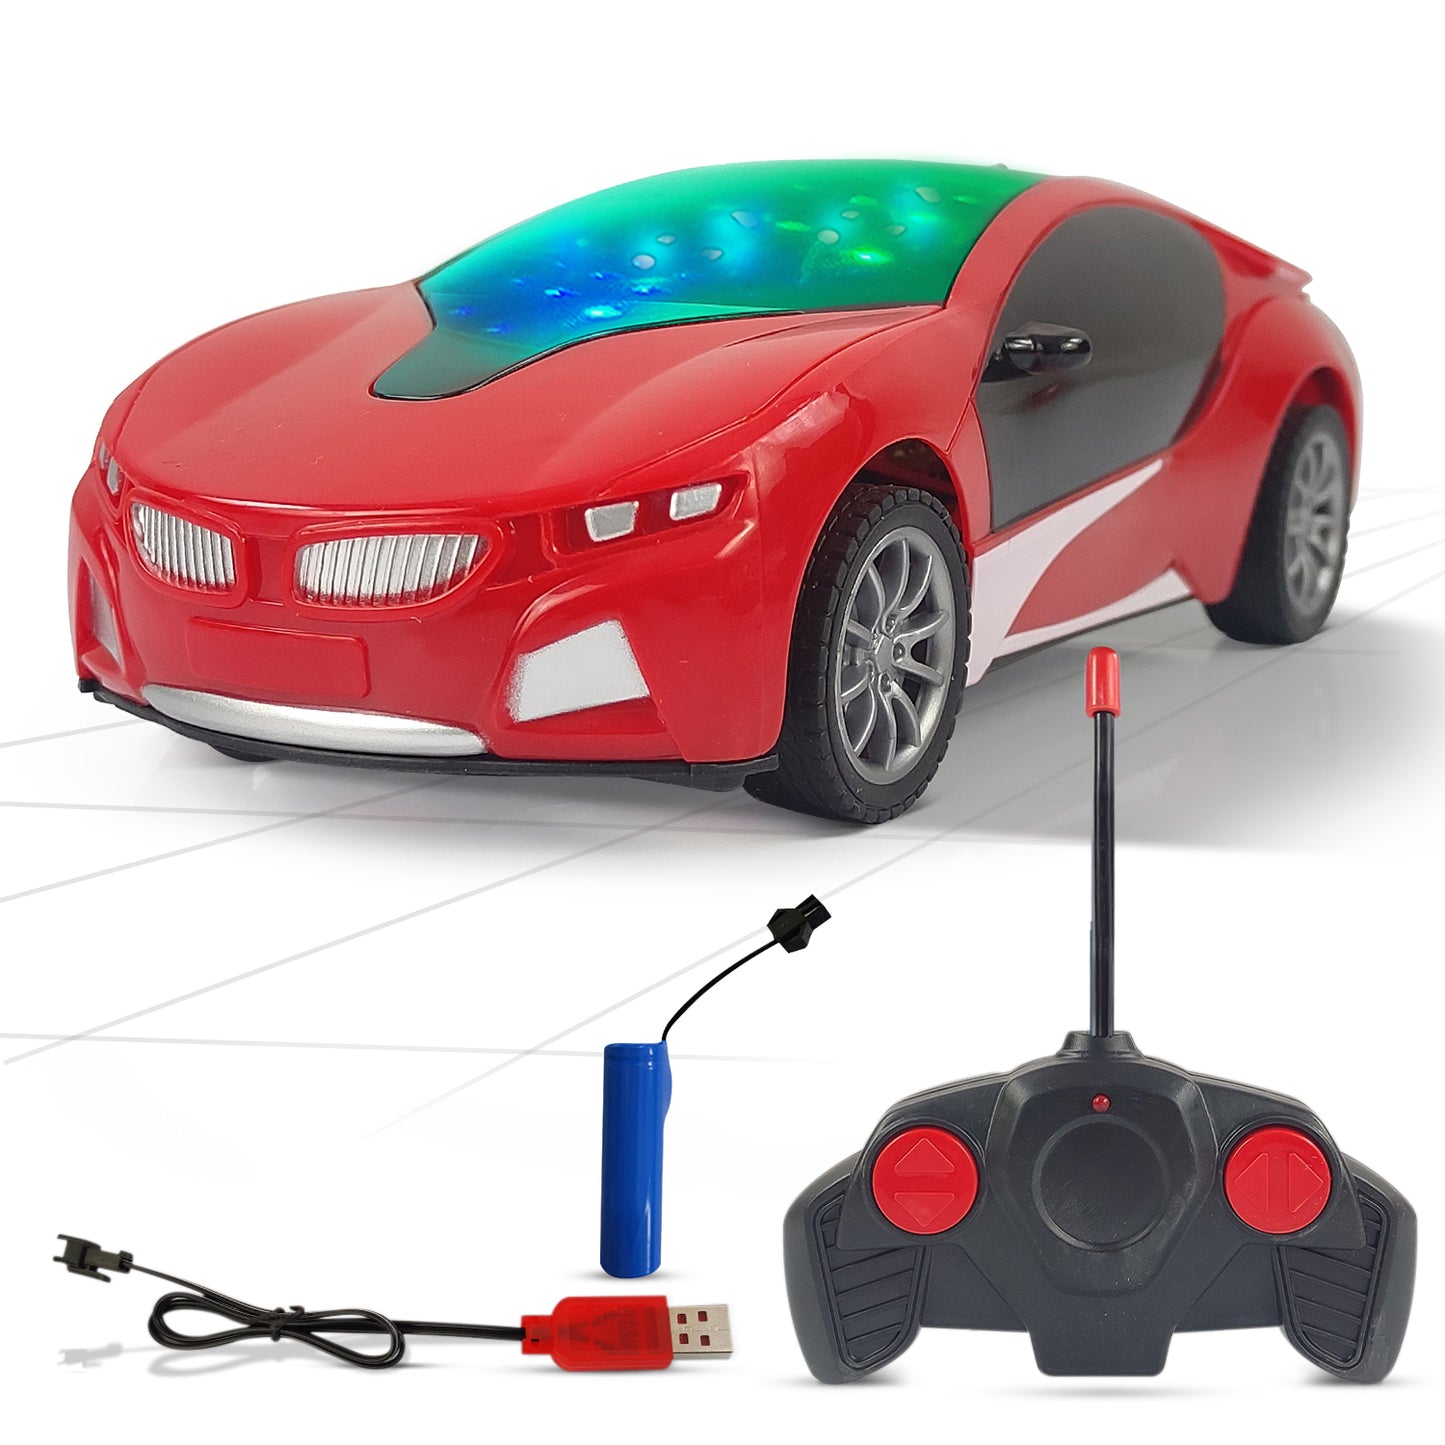 NHR Remote Control Car with LED Light, 4 Function, Racing Car (Choose Any color)